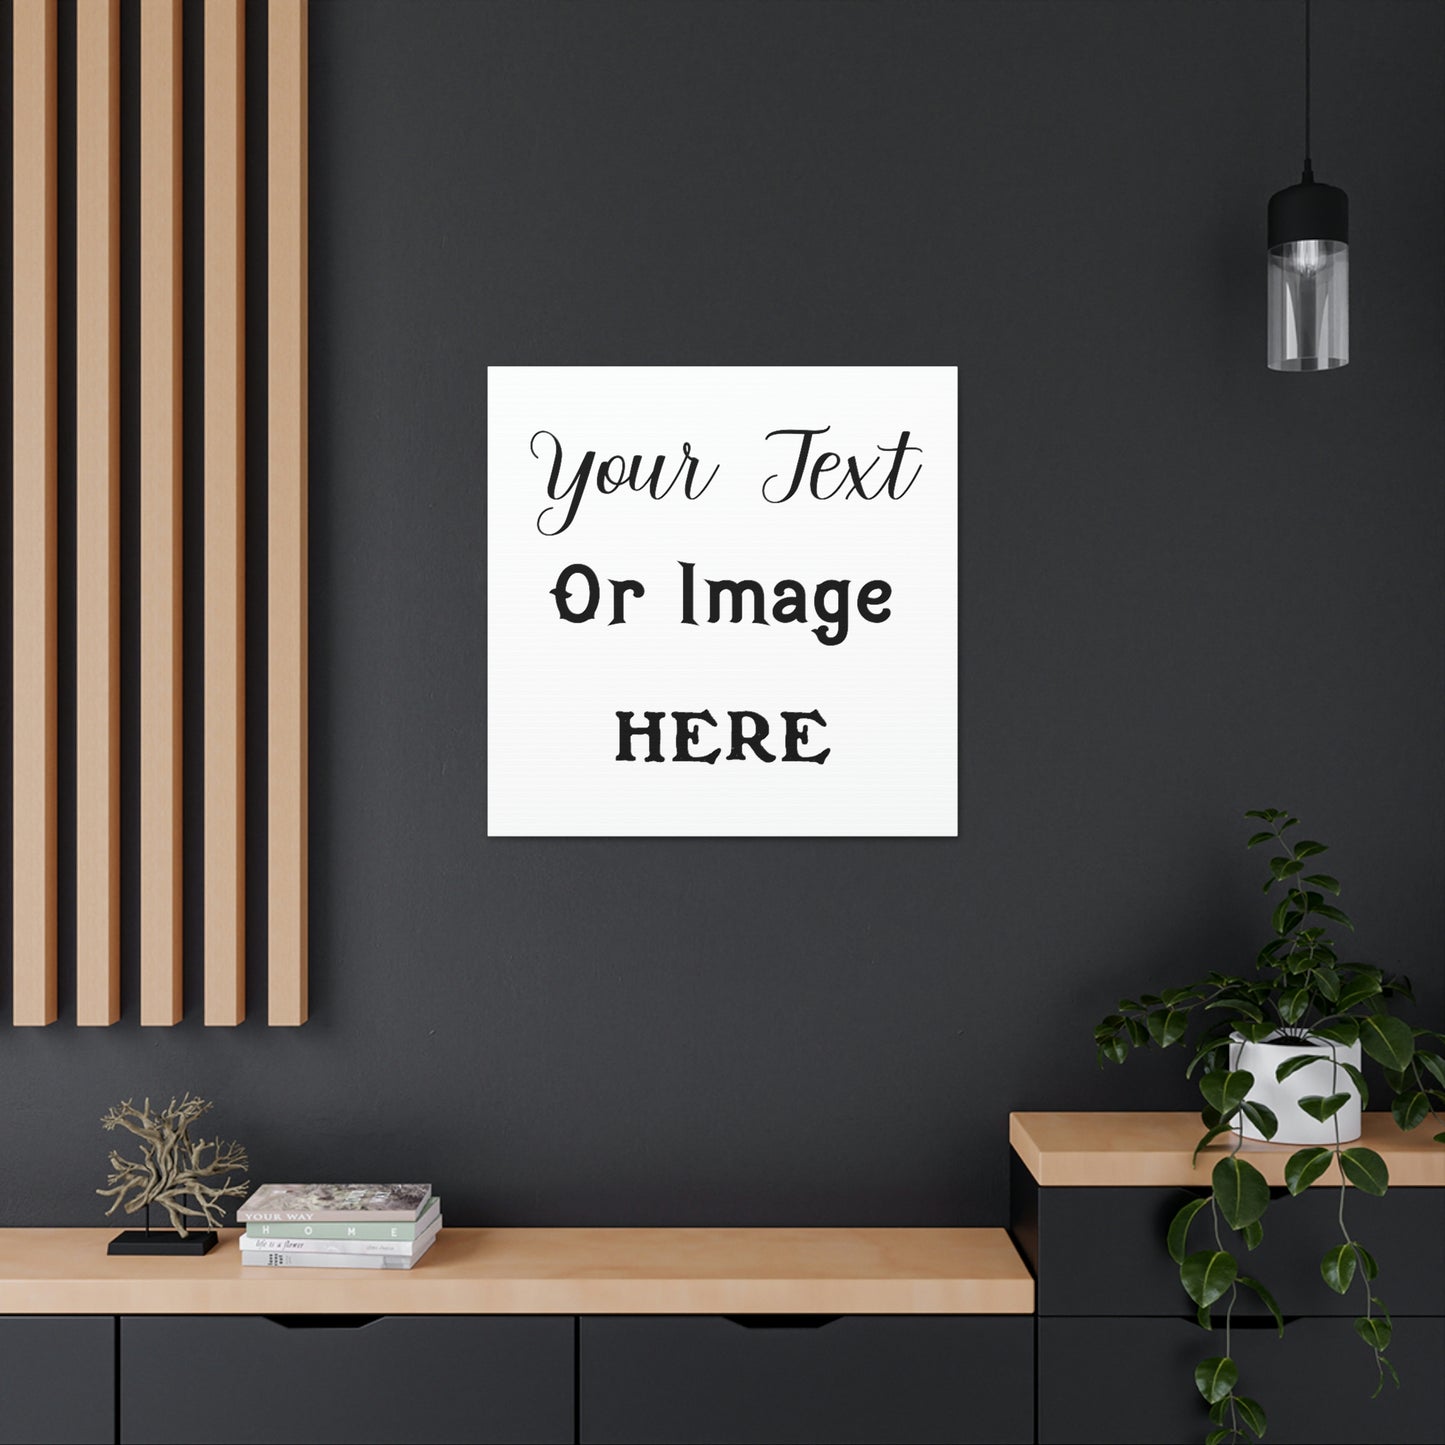 Custom Canvas Wall Art - Weave Got Gifts - Unique Gifts You Won’t Find Anywhere Else!